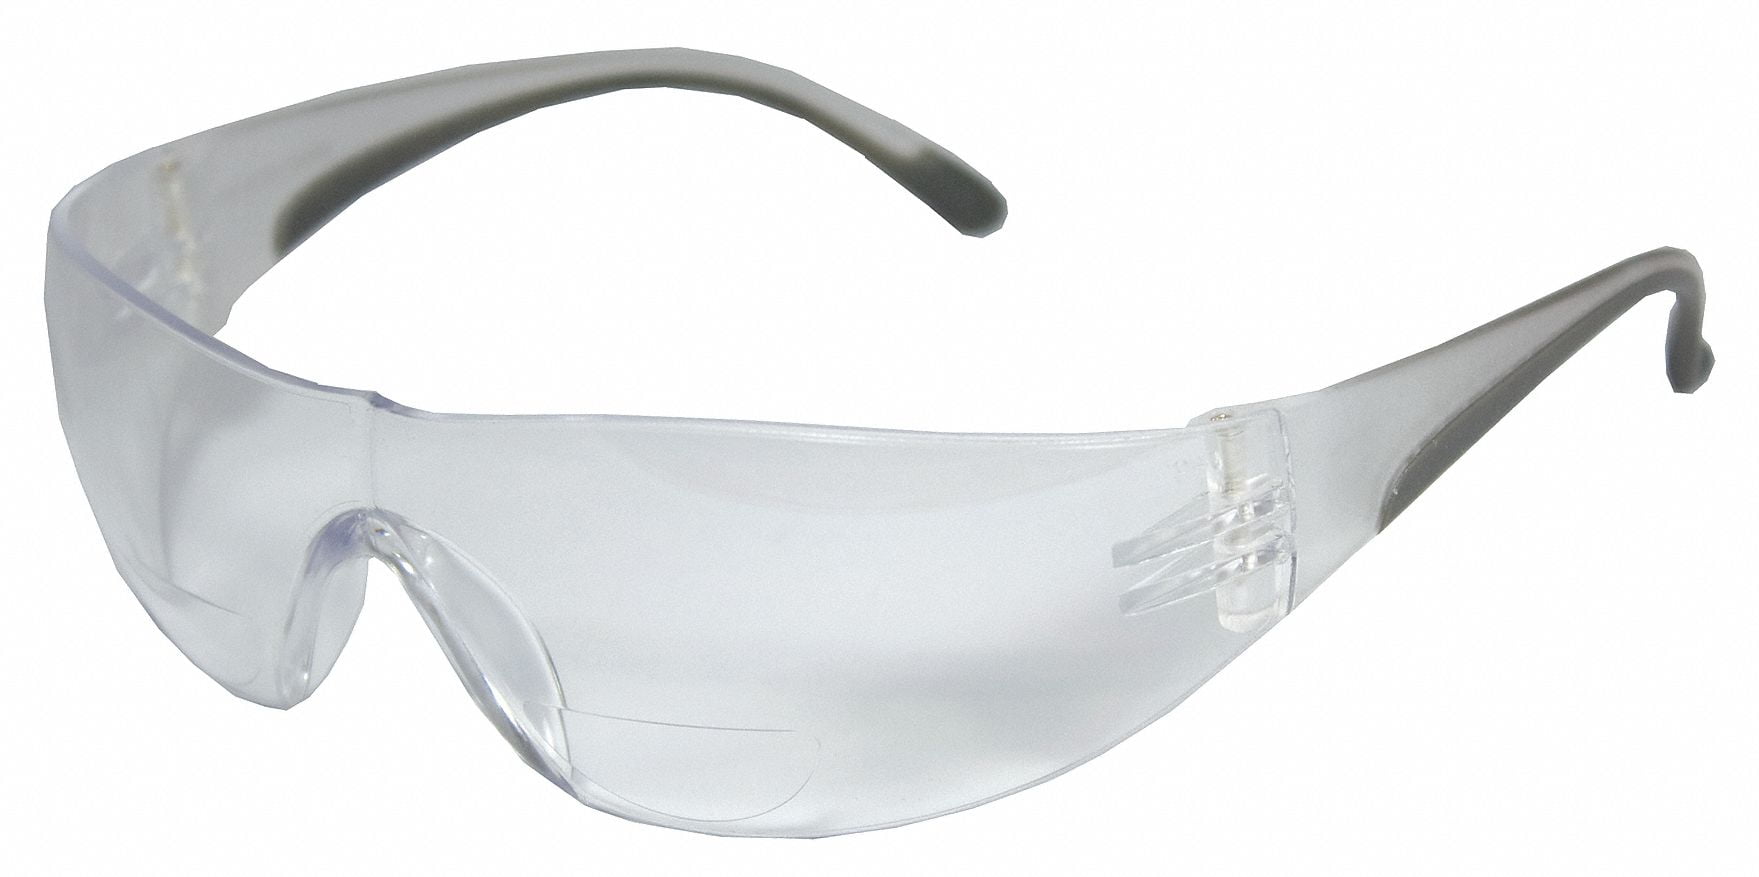 Crossfire ES5 2.5 Clear Lens Bifocal Reading Magnifier Safety Glasses Z87.1 